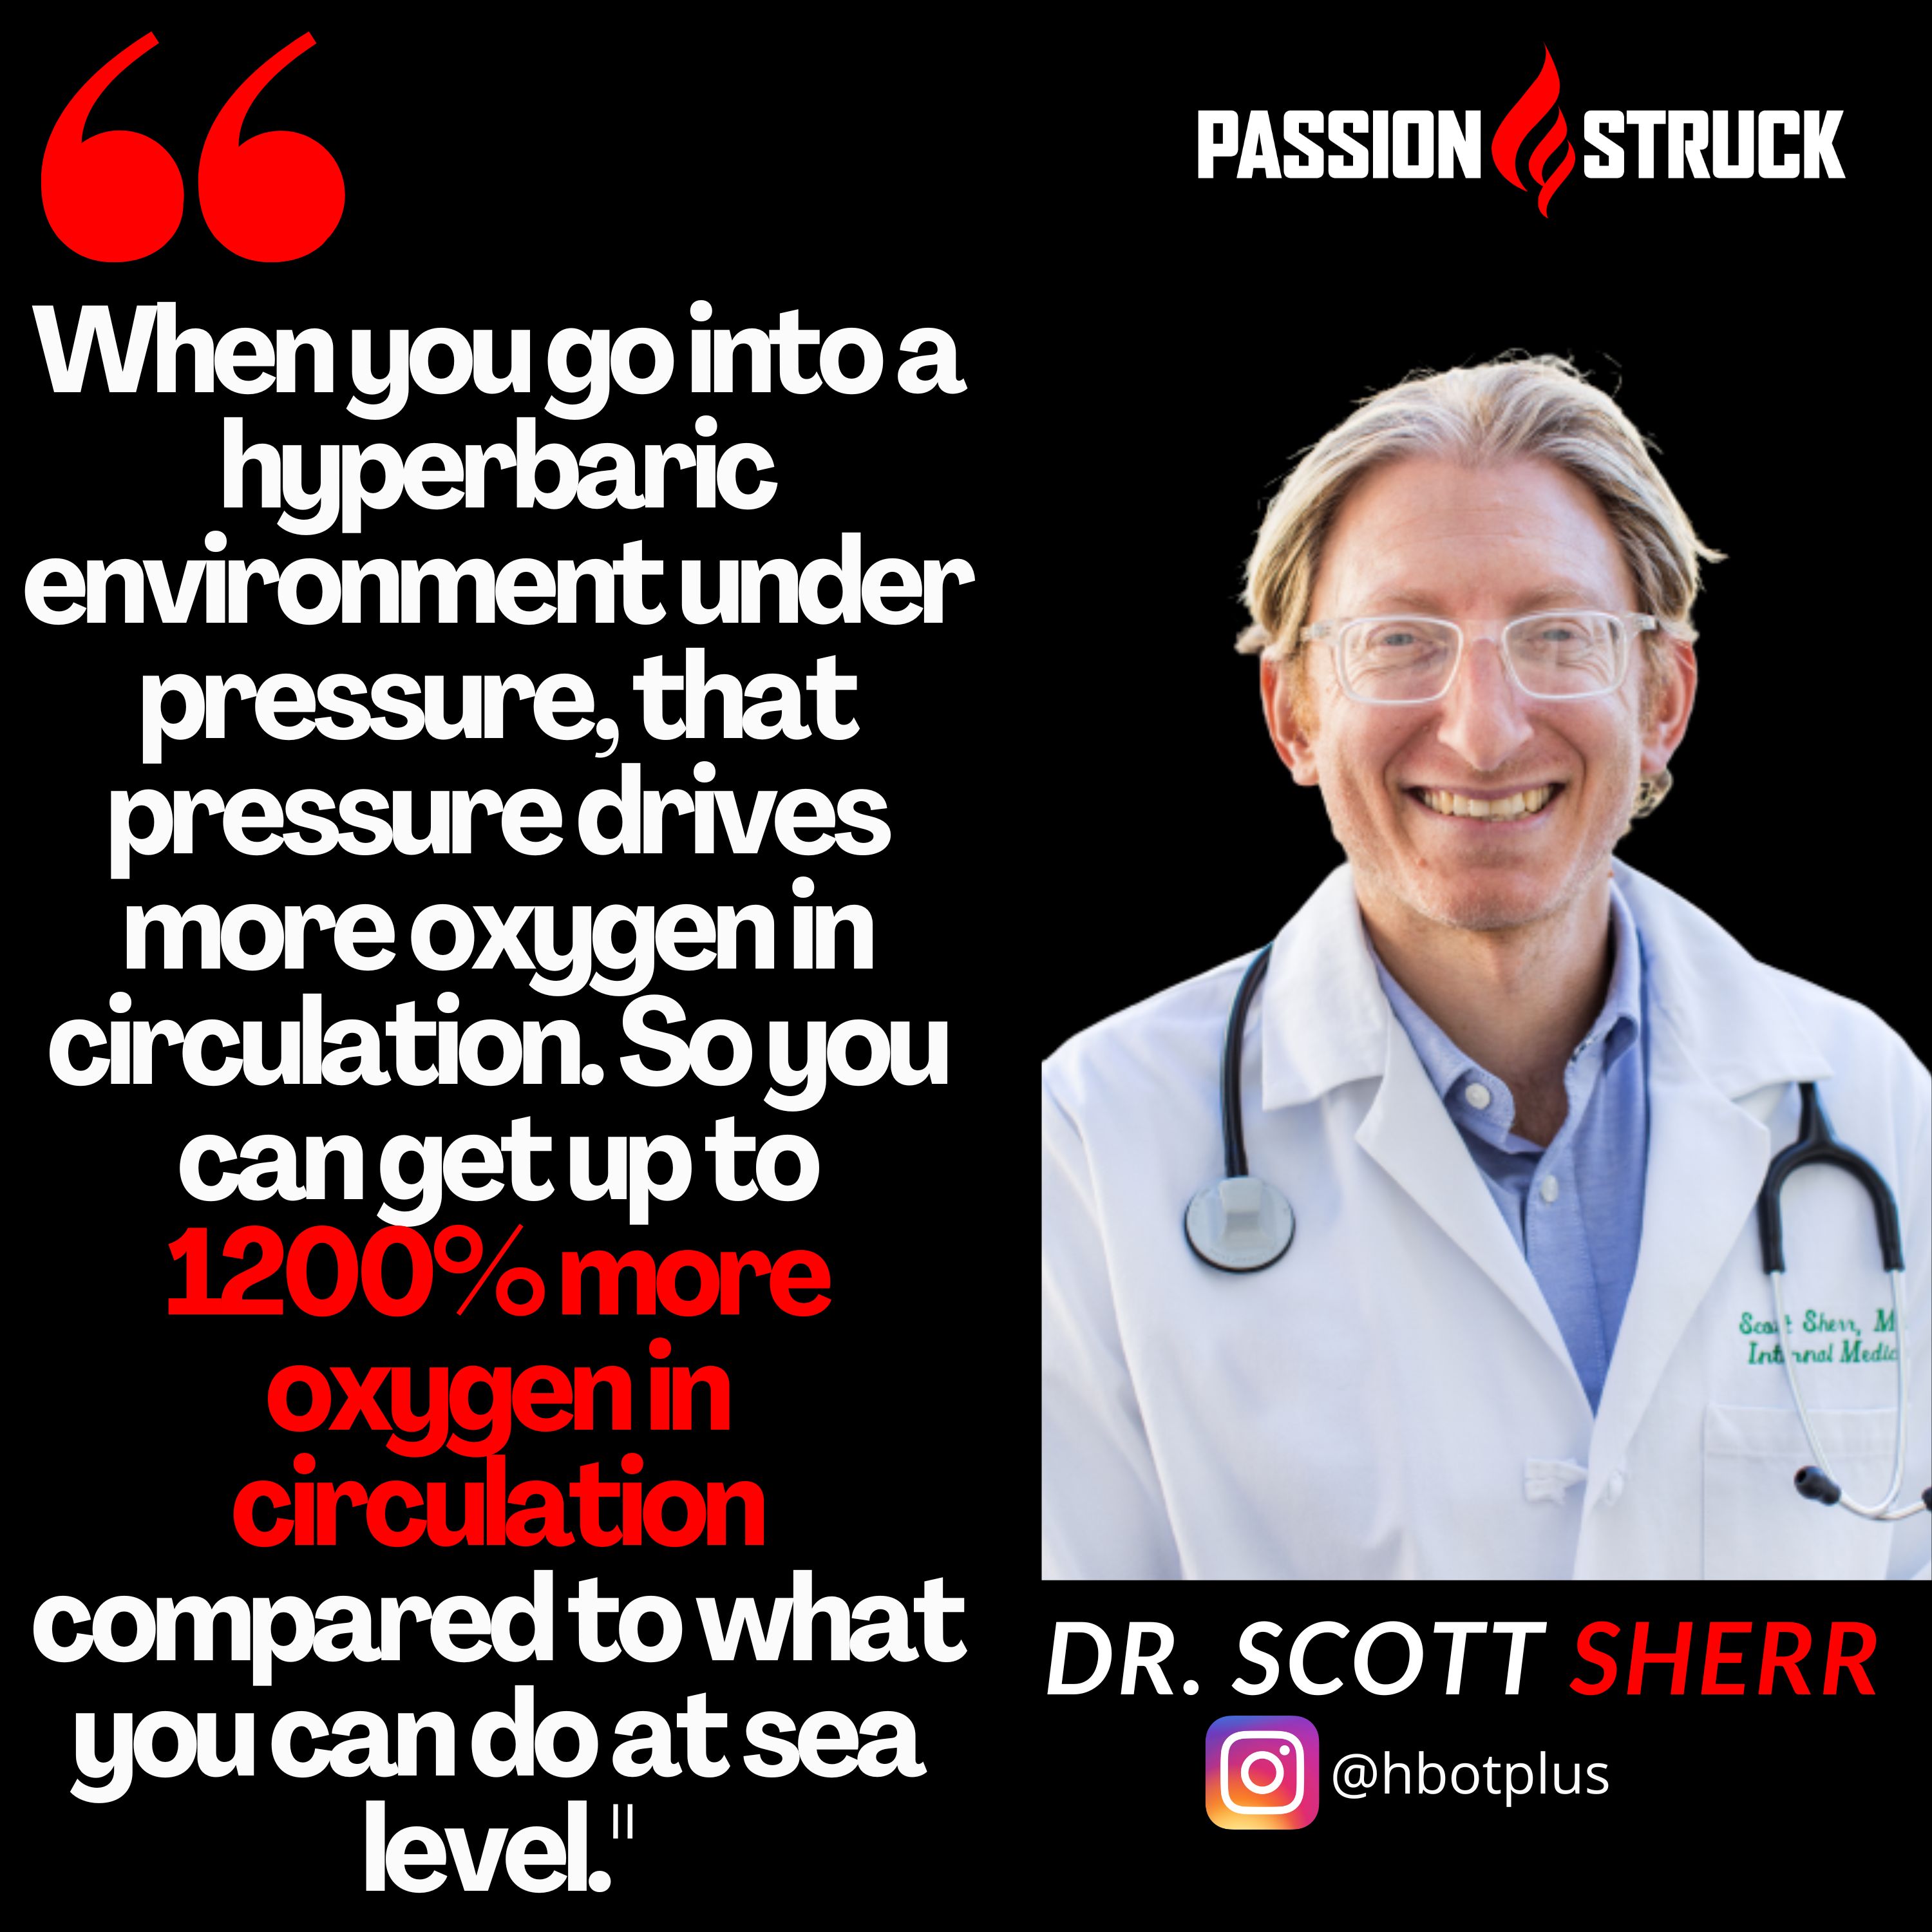 Dr. Scott Sherr quote about hyperbaric oxygen therapy for passion struck podcast 